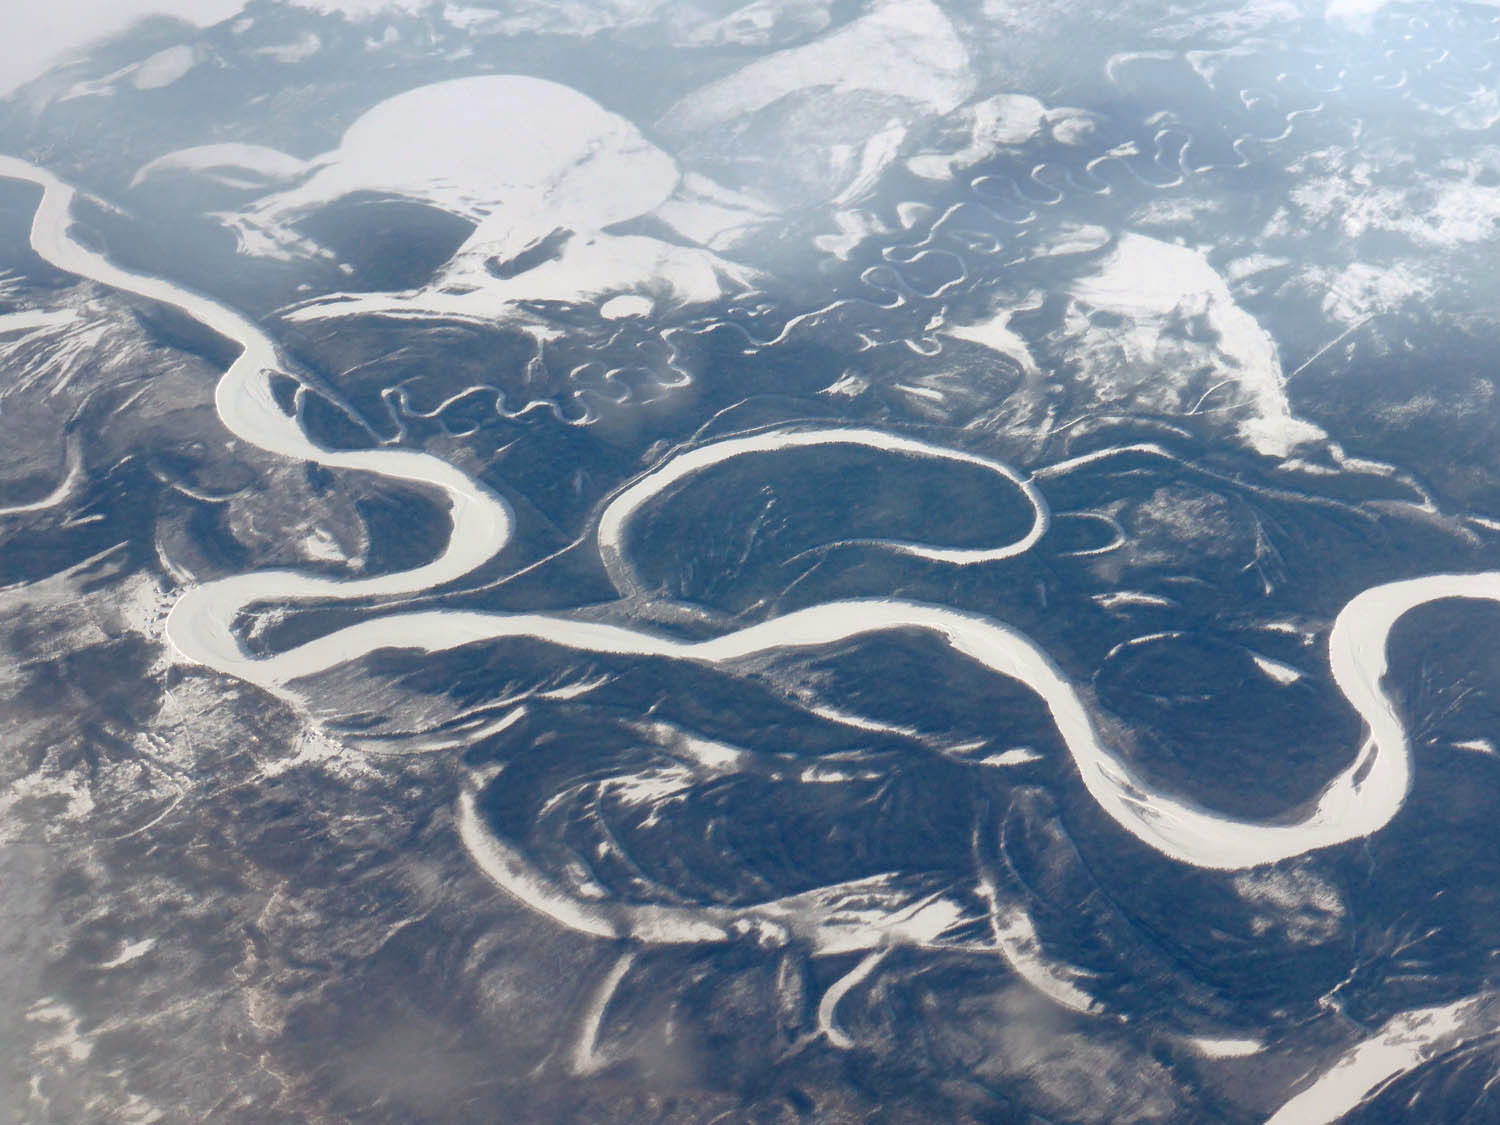 Frozen rivers meandering through forest